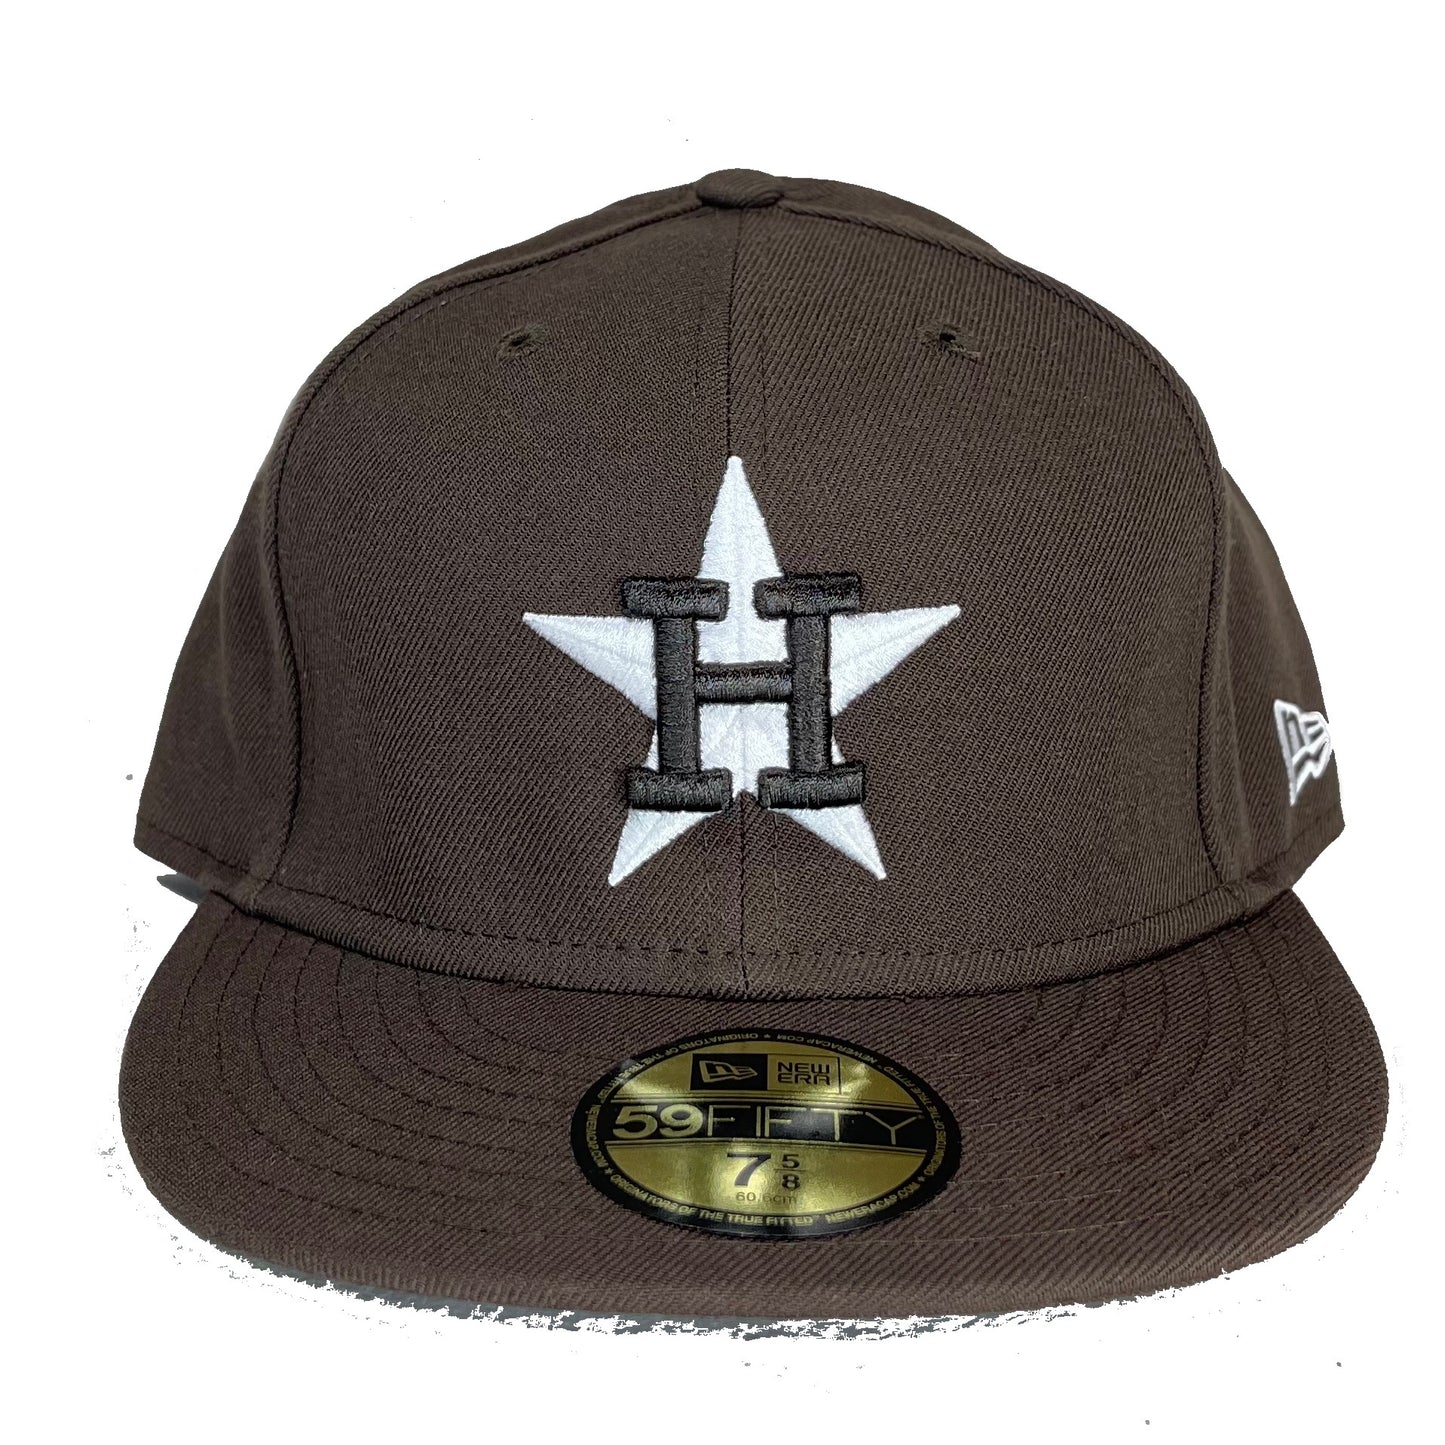 Houston Astros (Brown) Fitted